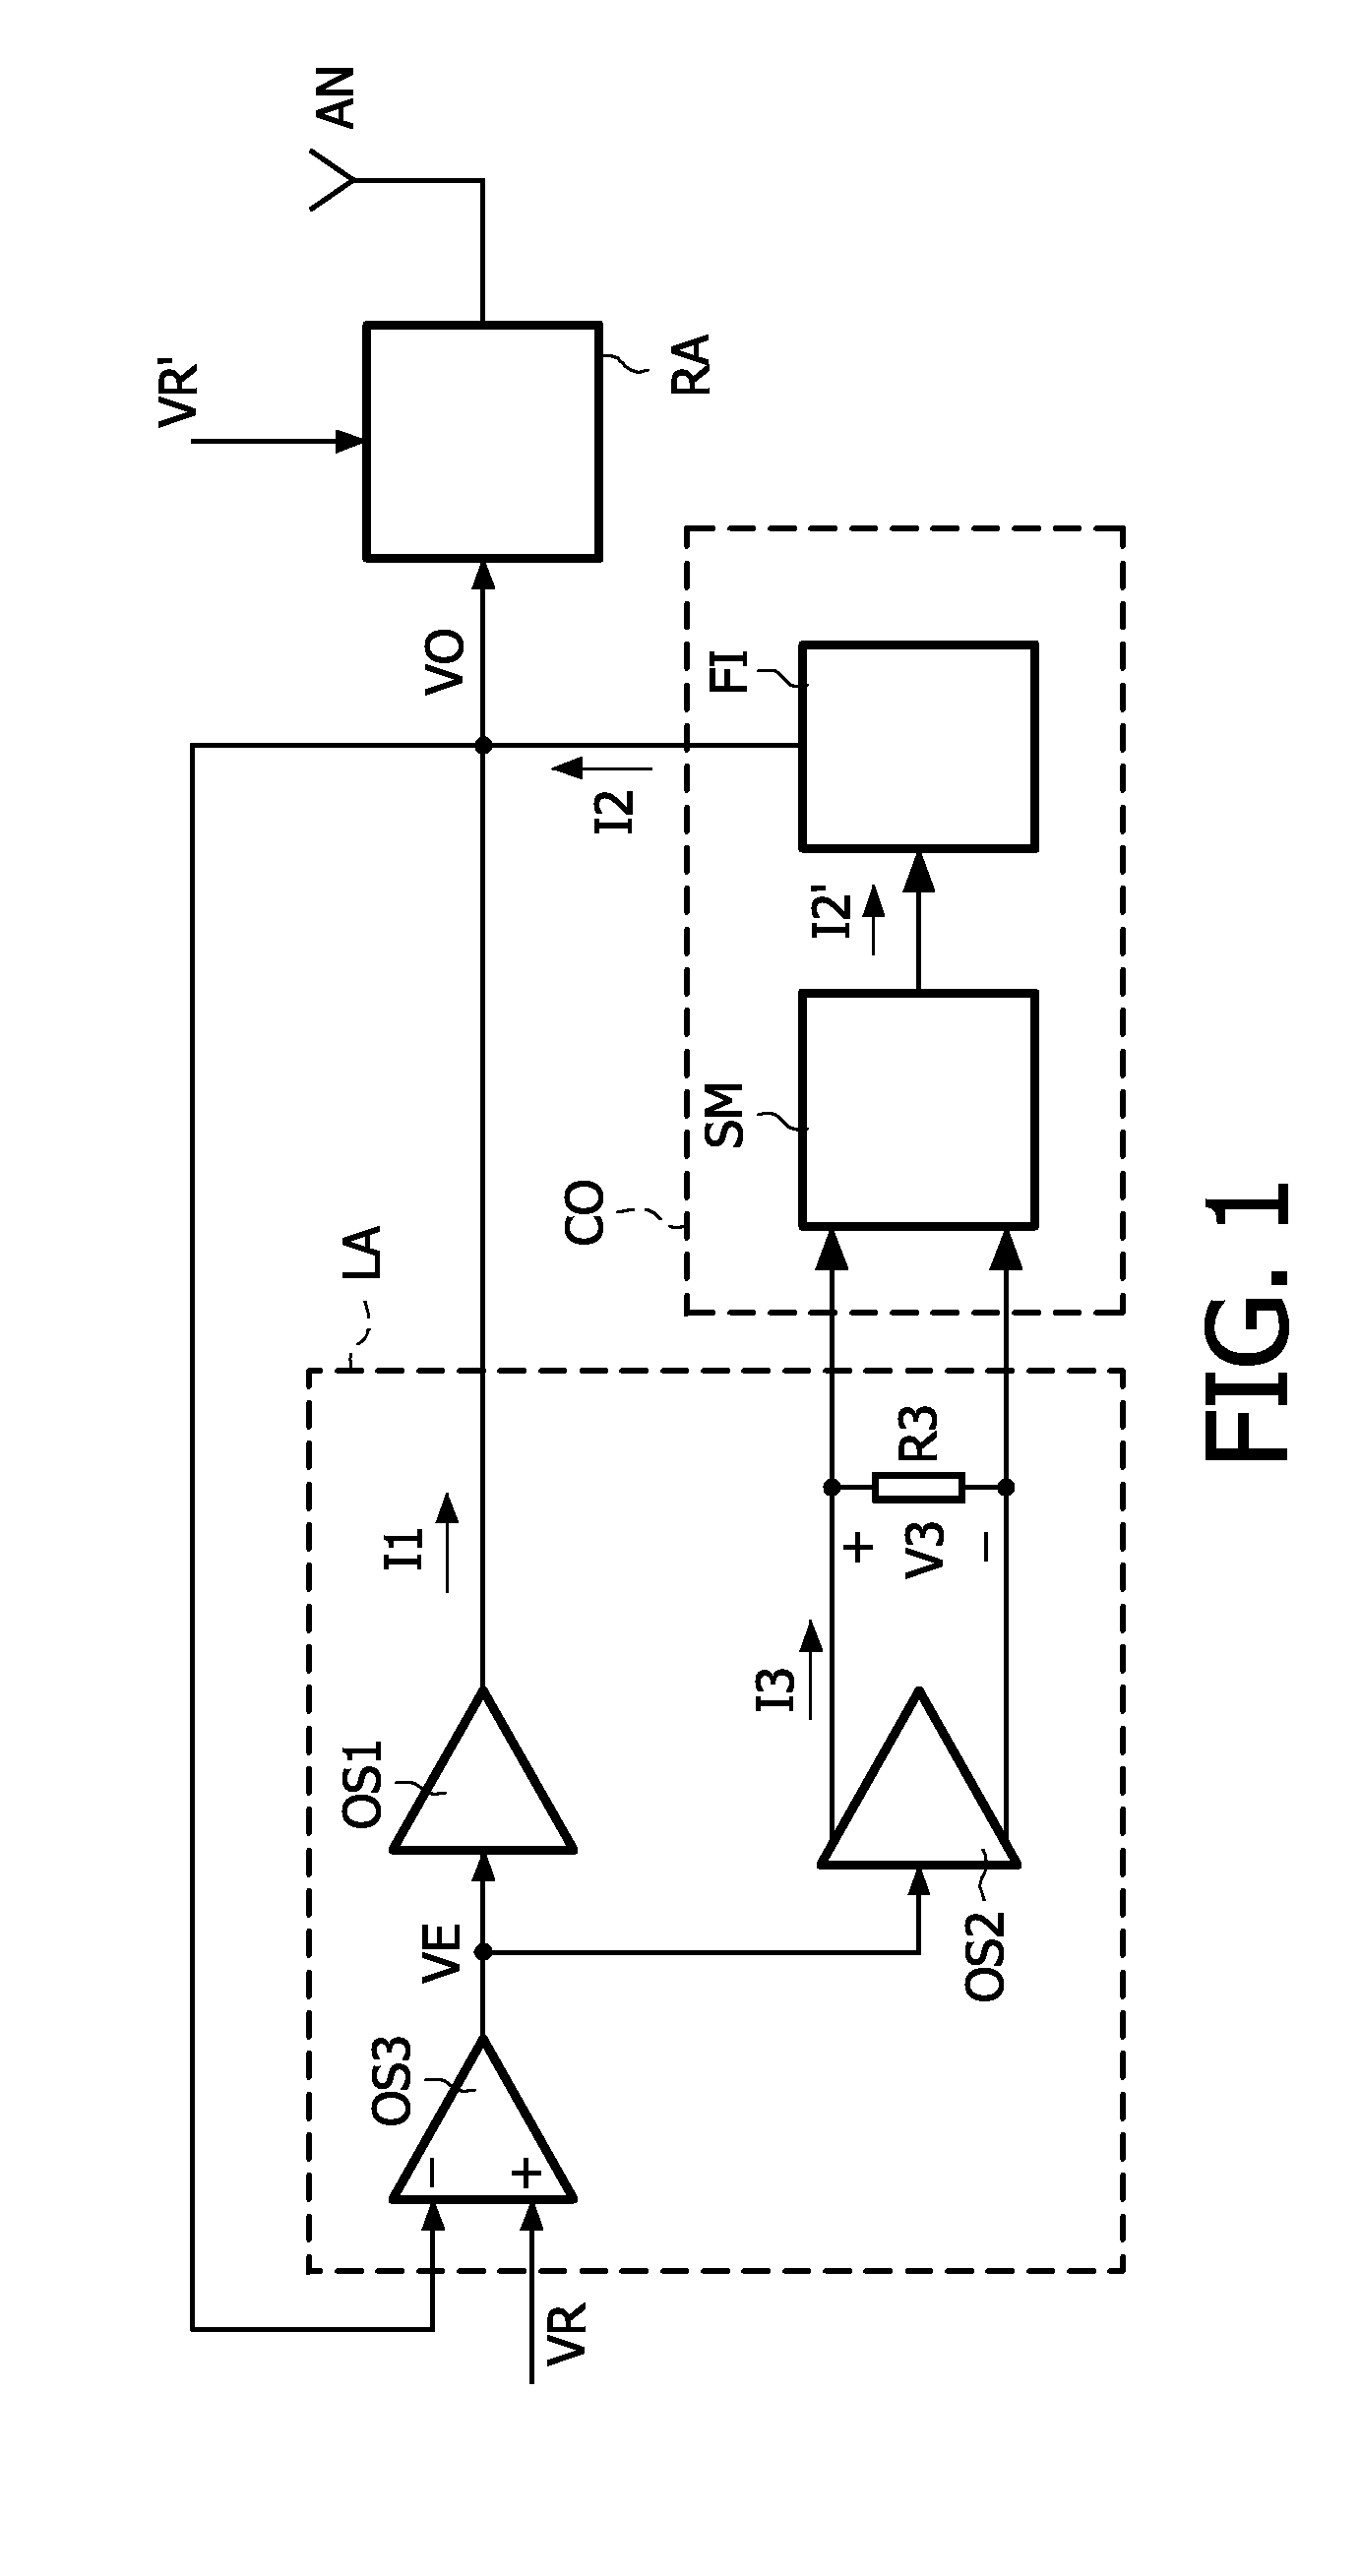 Parallel arranged linear amplifier and dc-dc converter